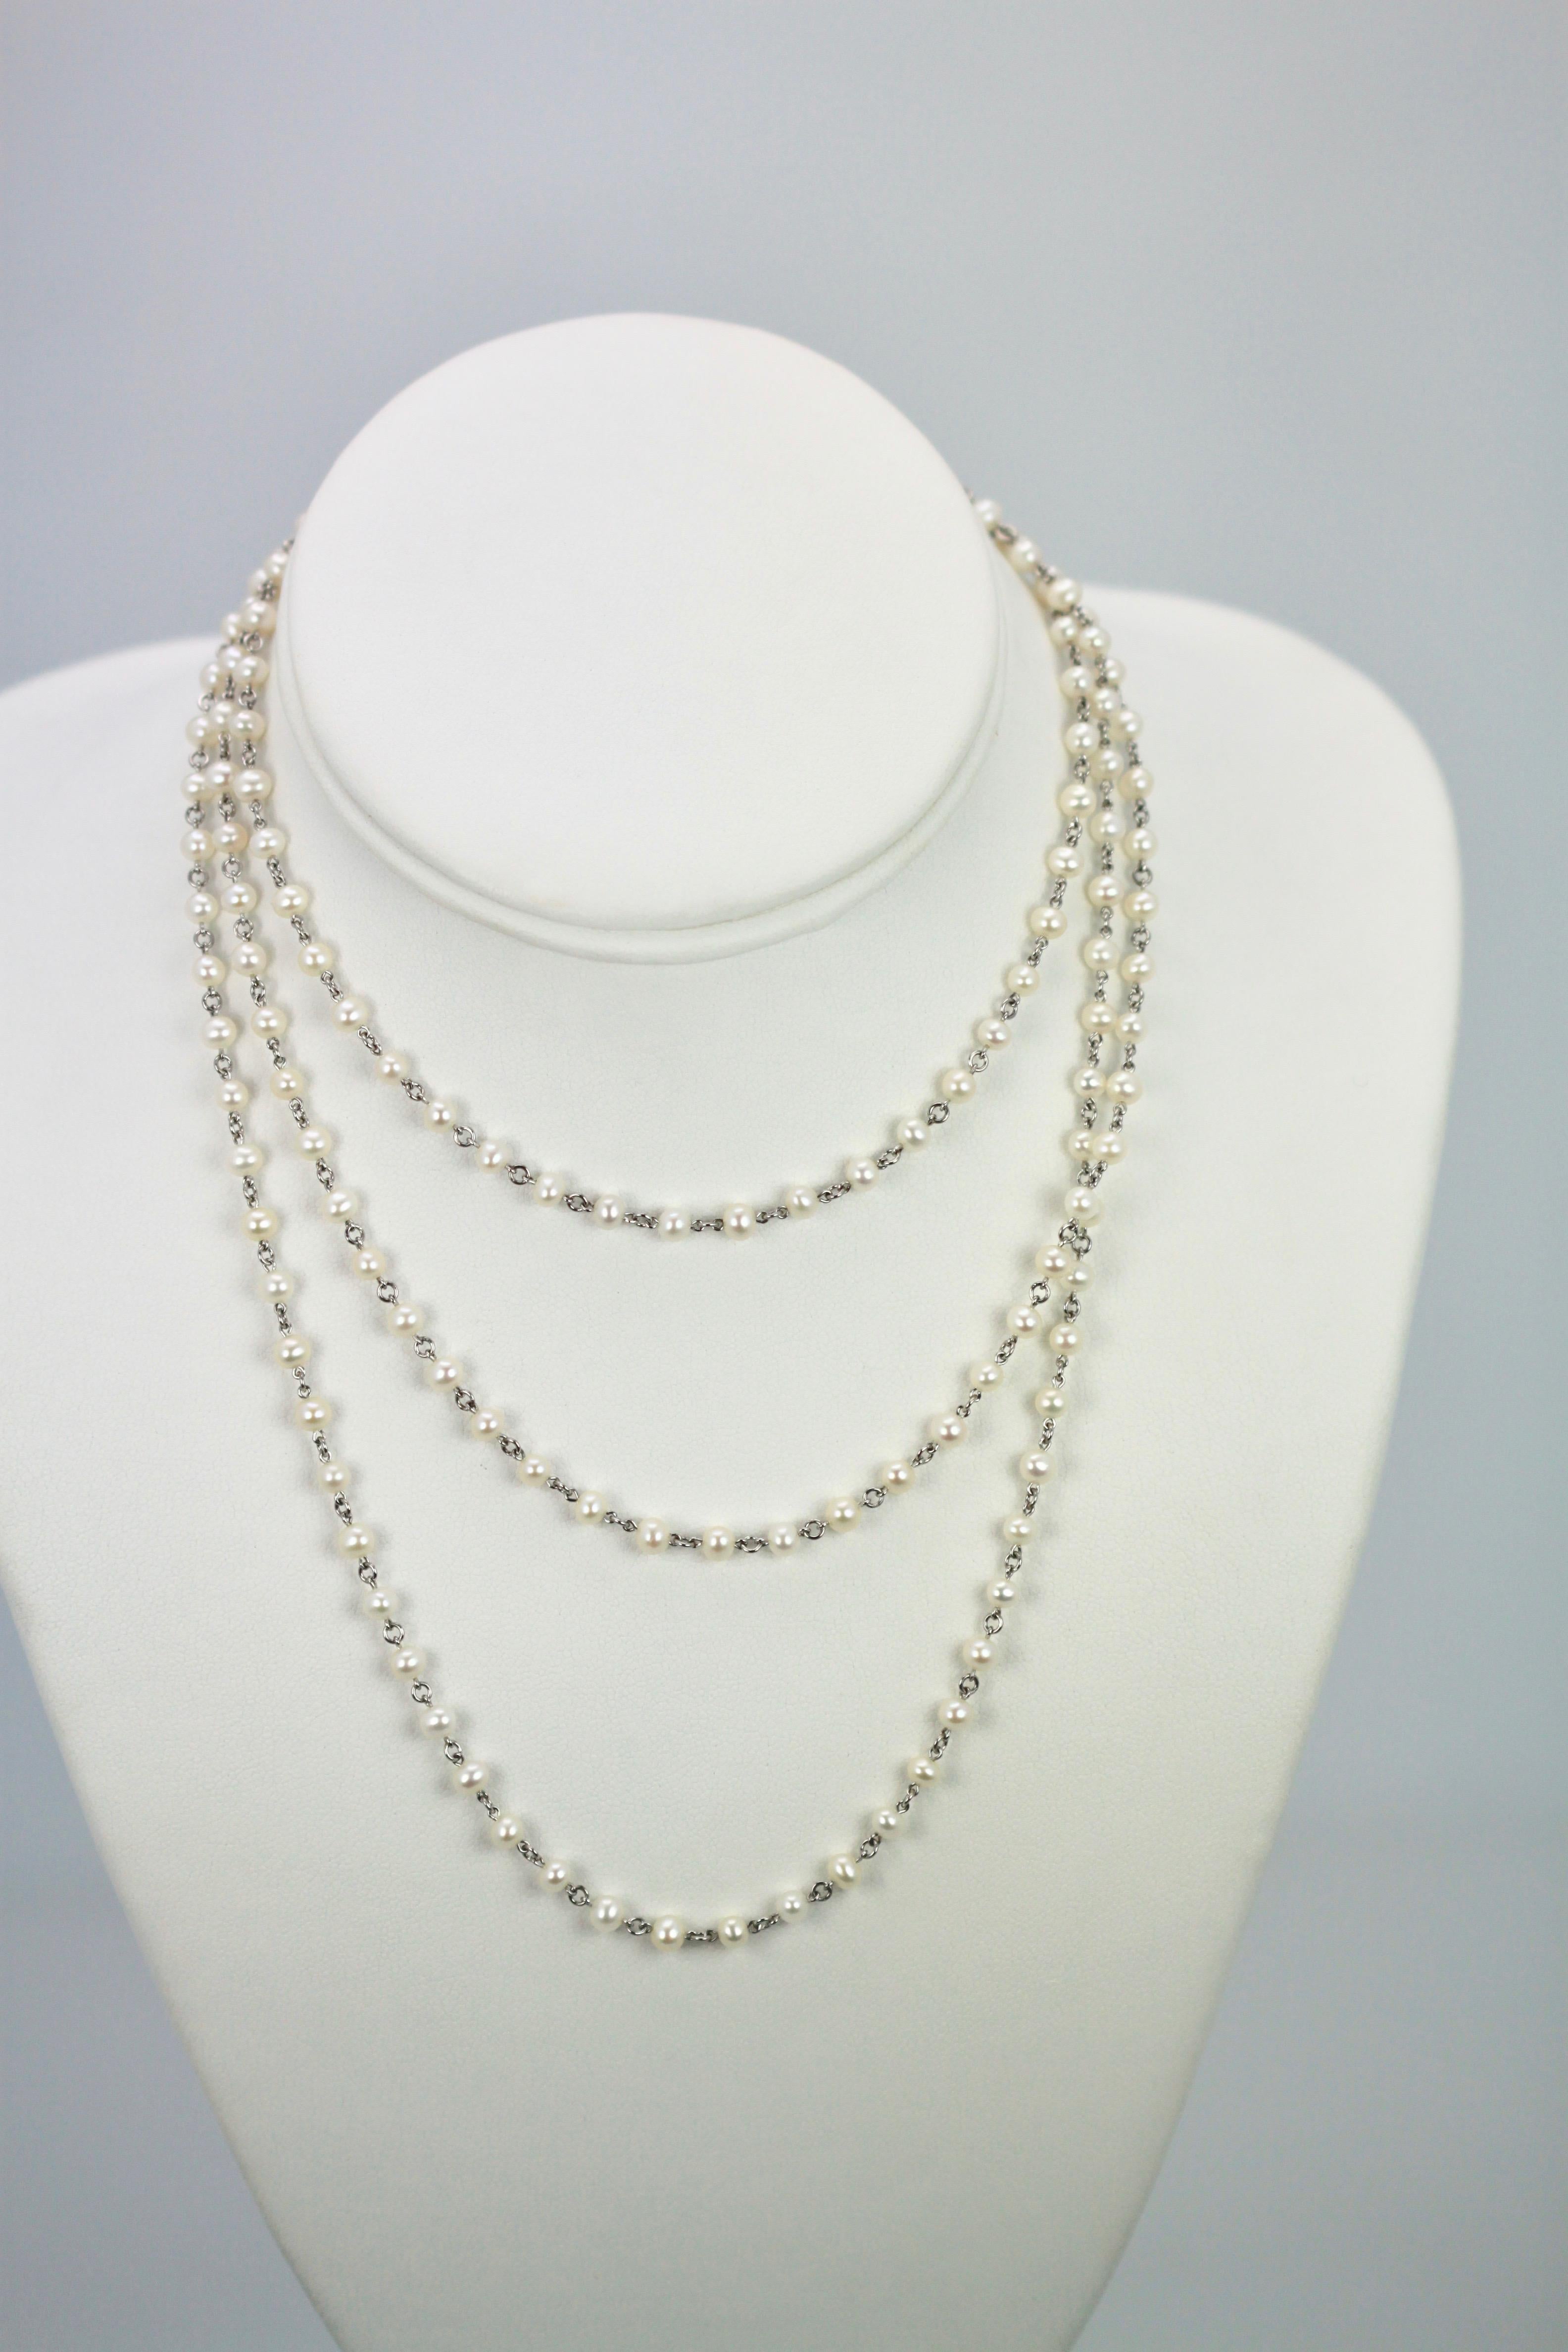 This Platinum Seed Pearl Necklace is extra long a total of 47